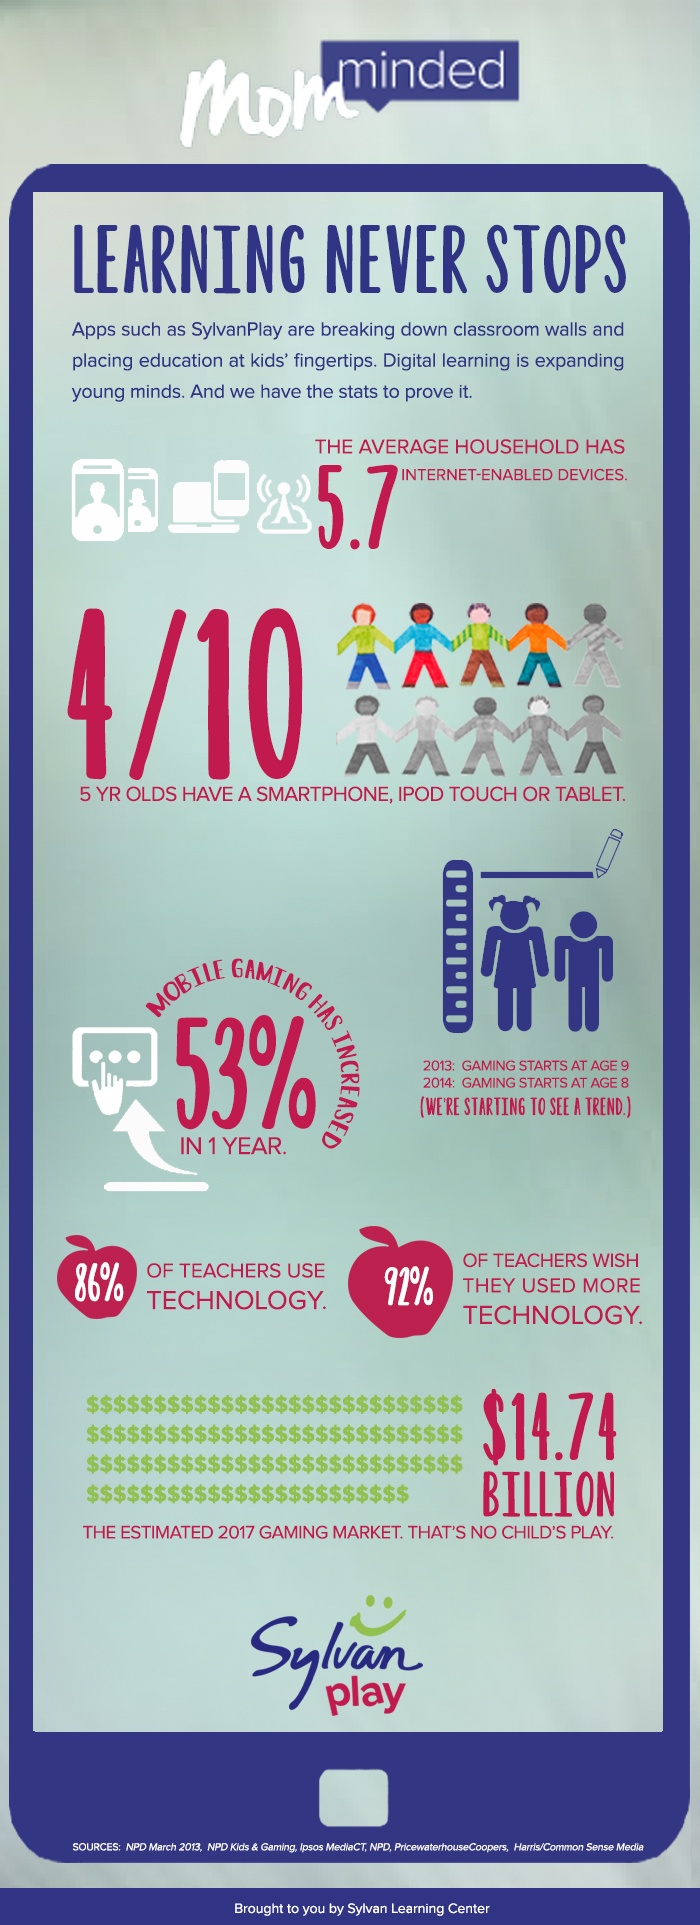 Digital Learning Never Stops Infographic